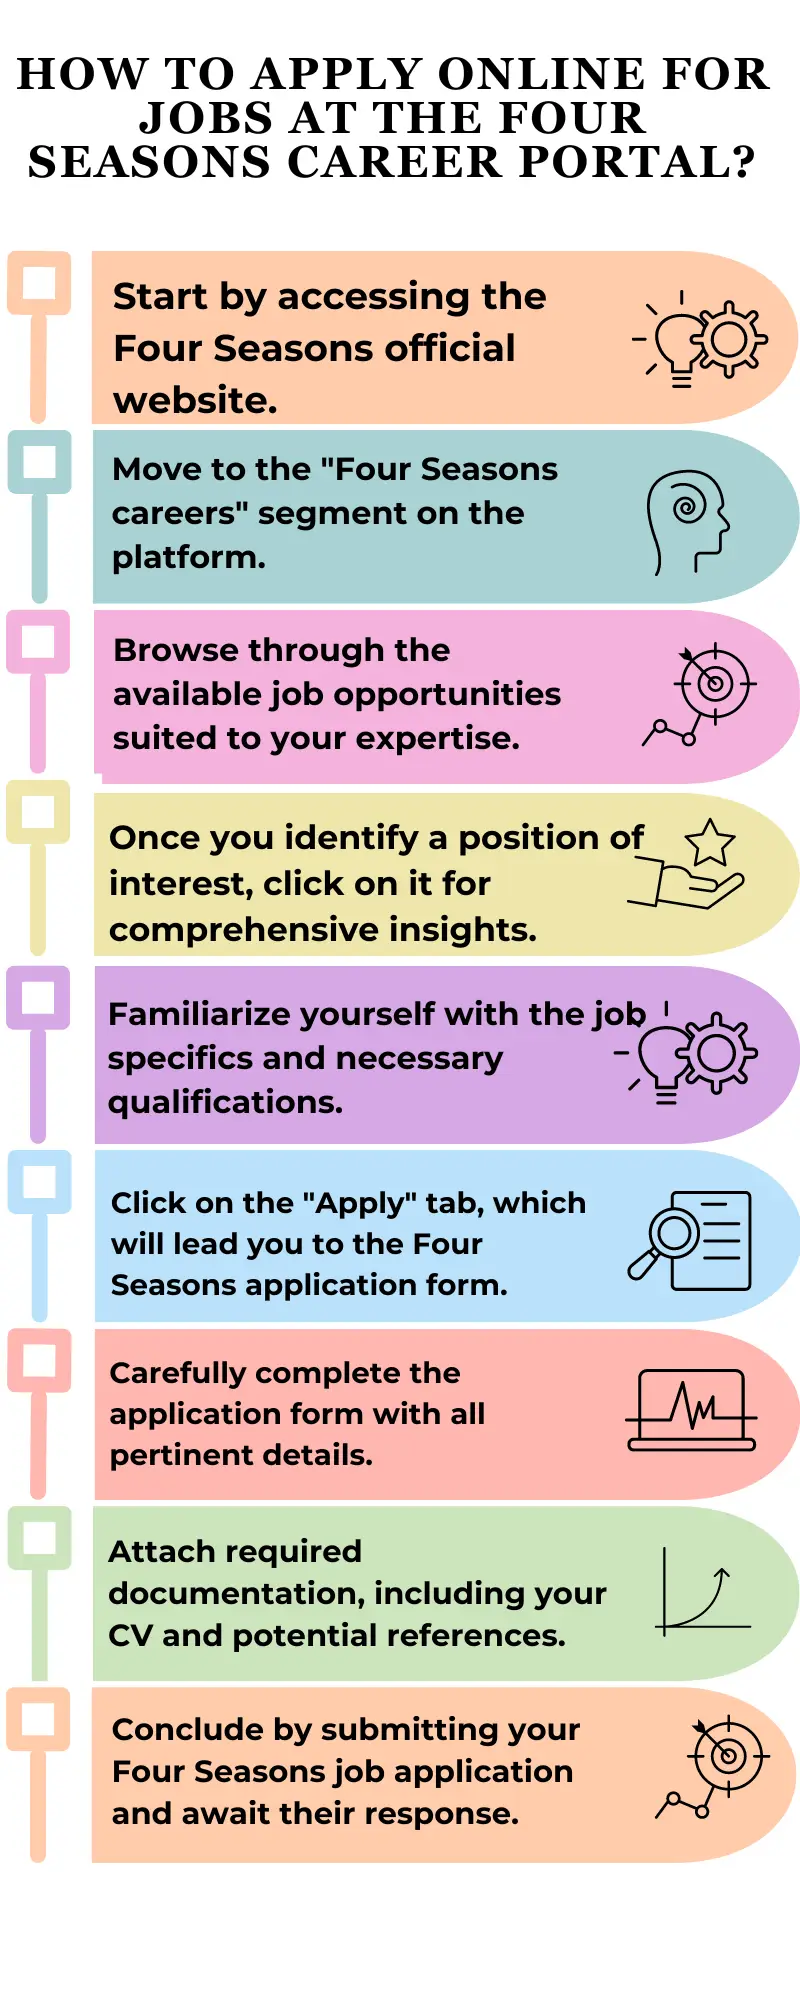 How to Apply Online for Jobs at the Four Seasons Career Portal?